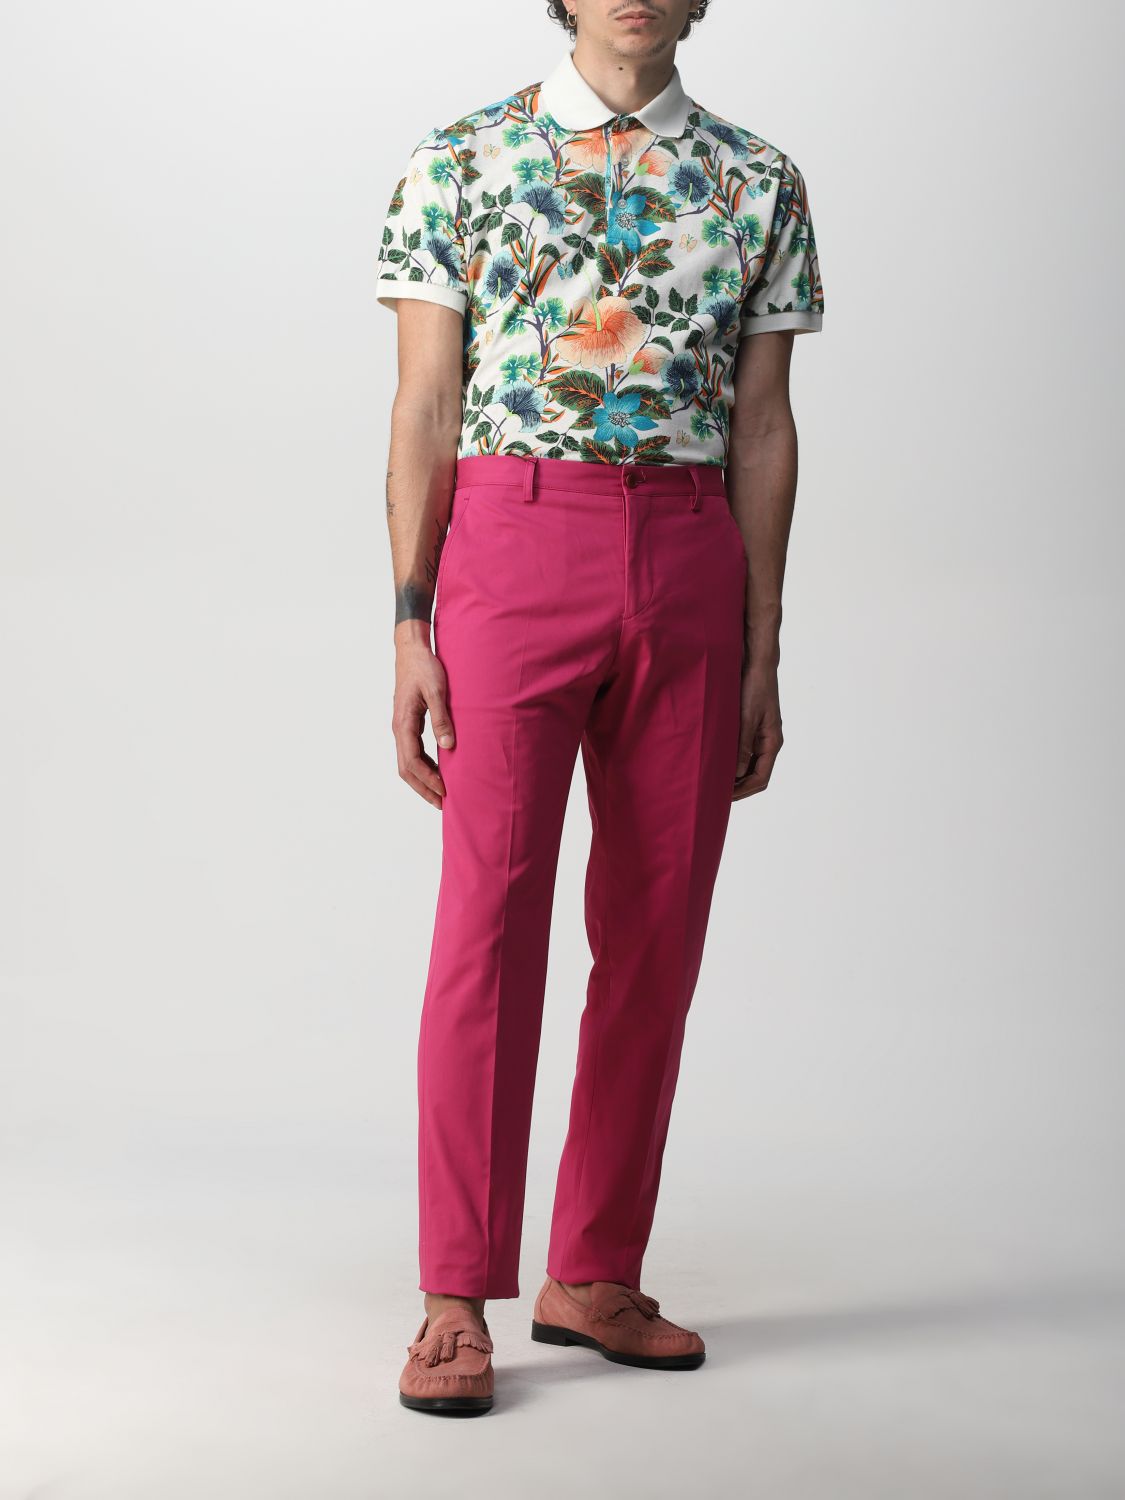 Etro classic pants with America pockets